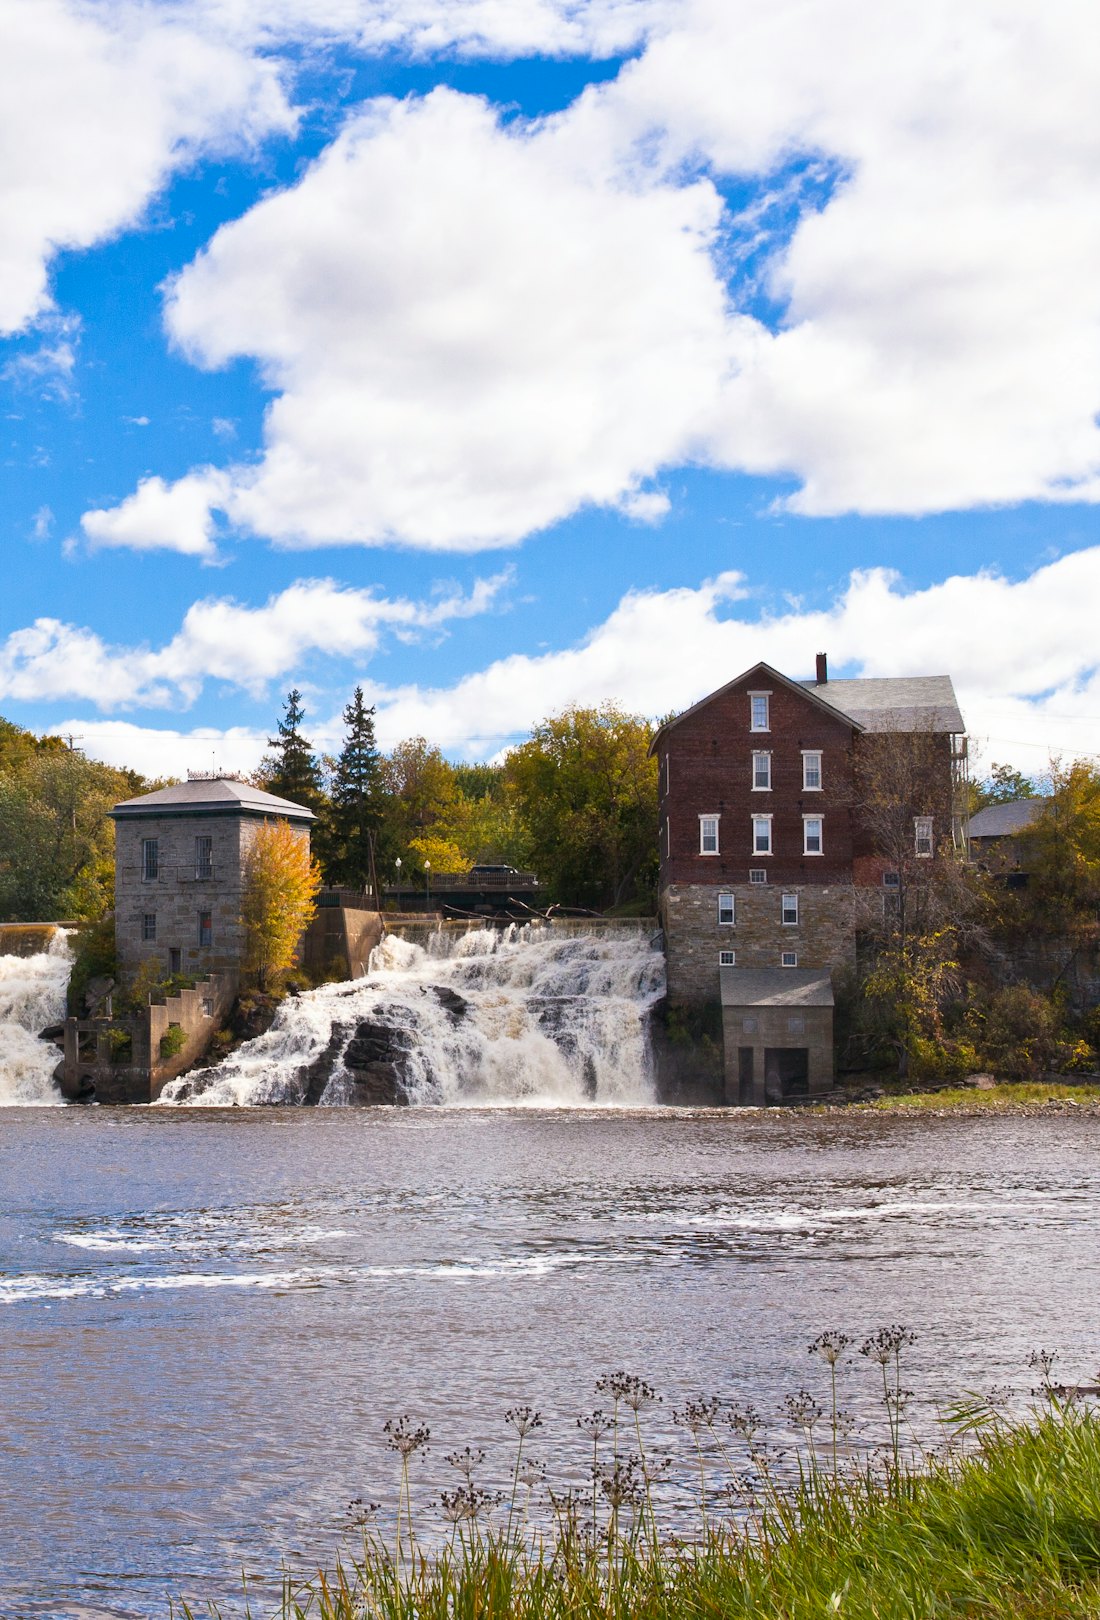 The image shows the falls on Otter Creek in the center of the city of Vergennes, the smallest city i...